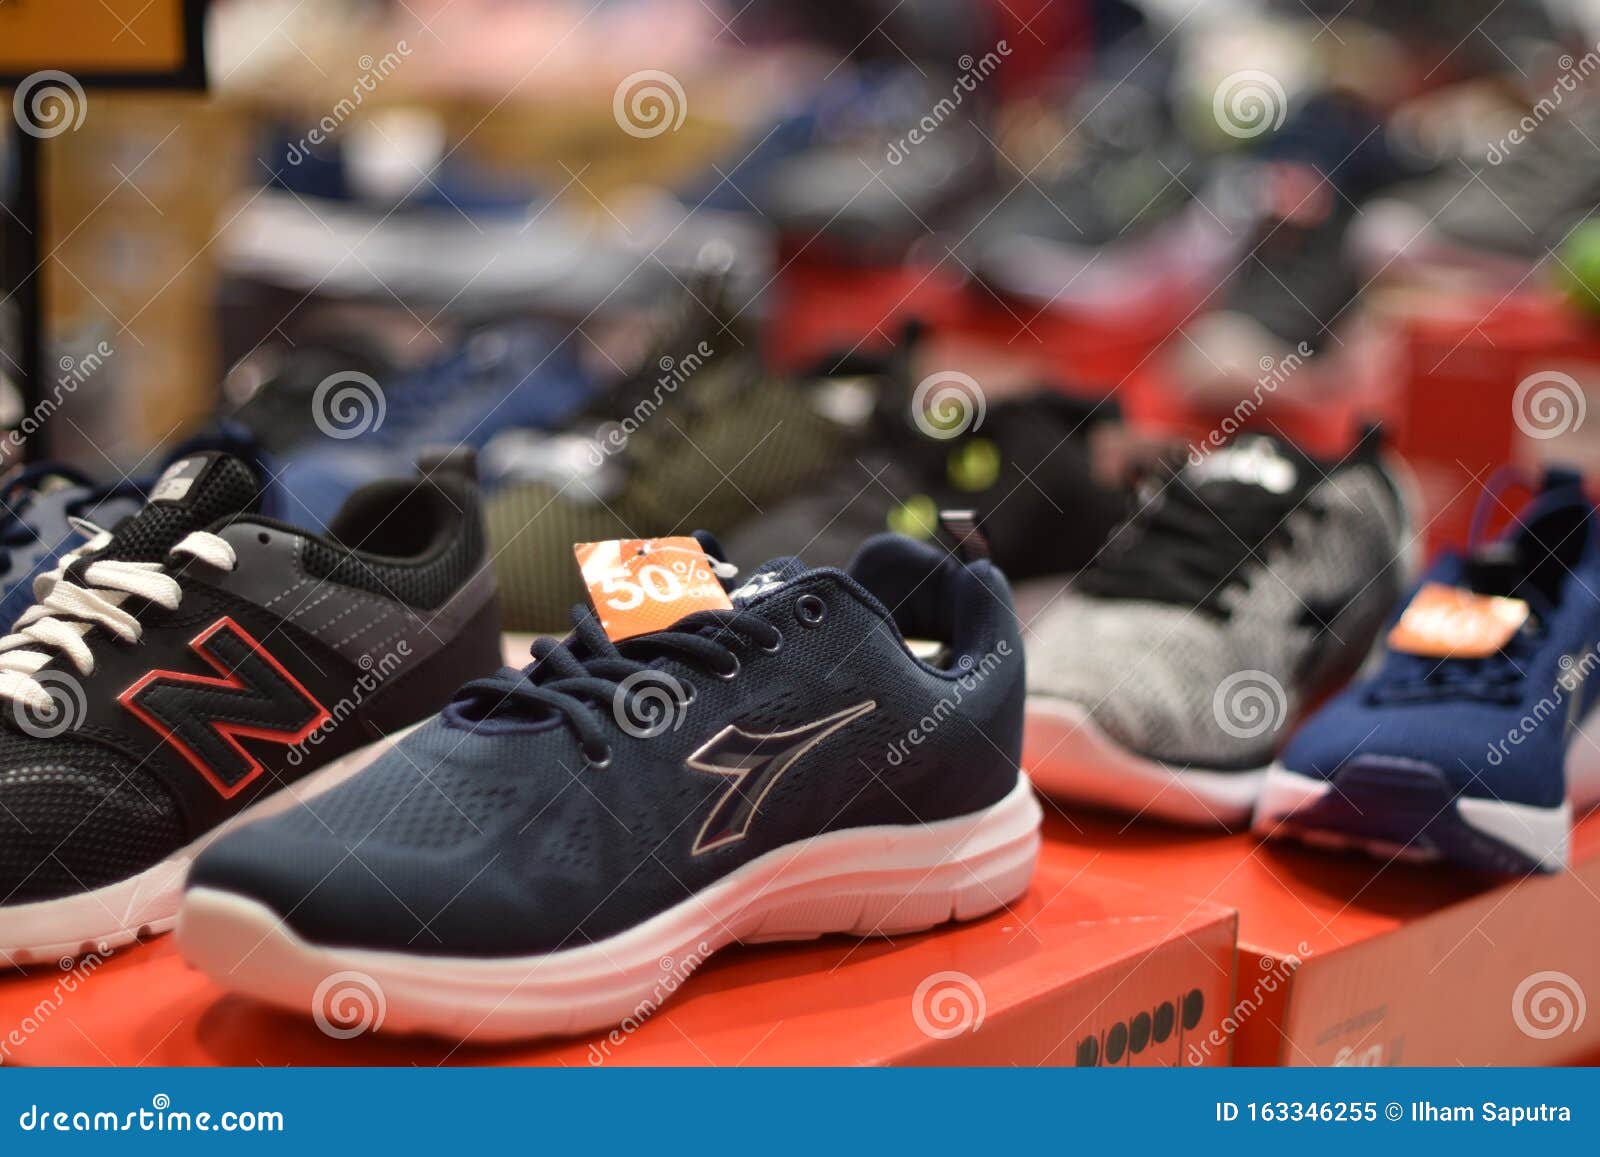 Sport Shoes Discount In The Mall Store Editorial Image